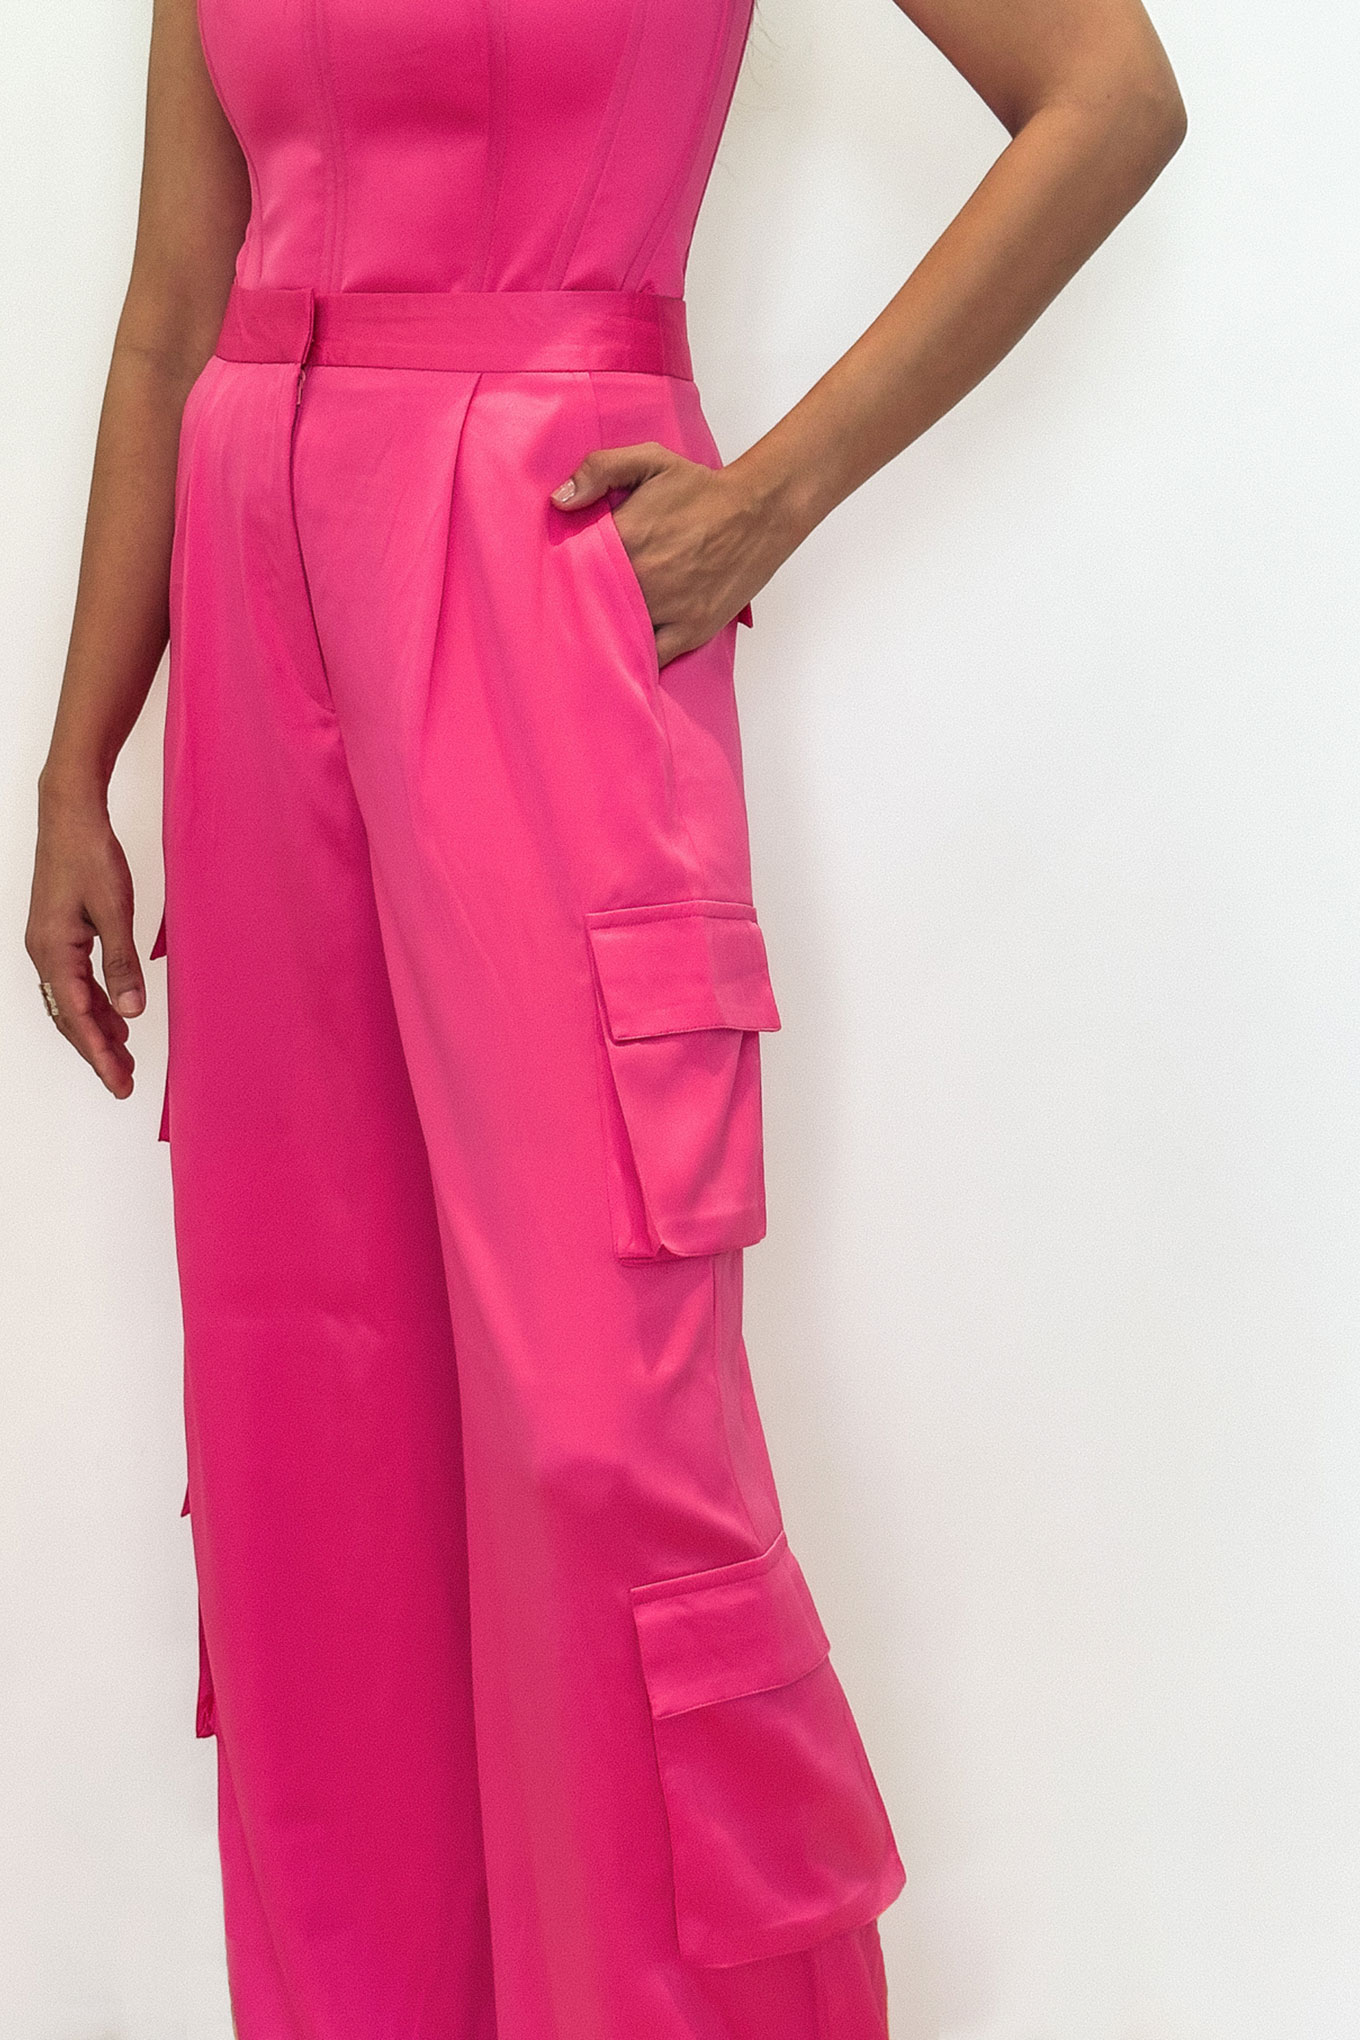 Lori Bright Pink Cargo Trousers  Anonymous The Company